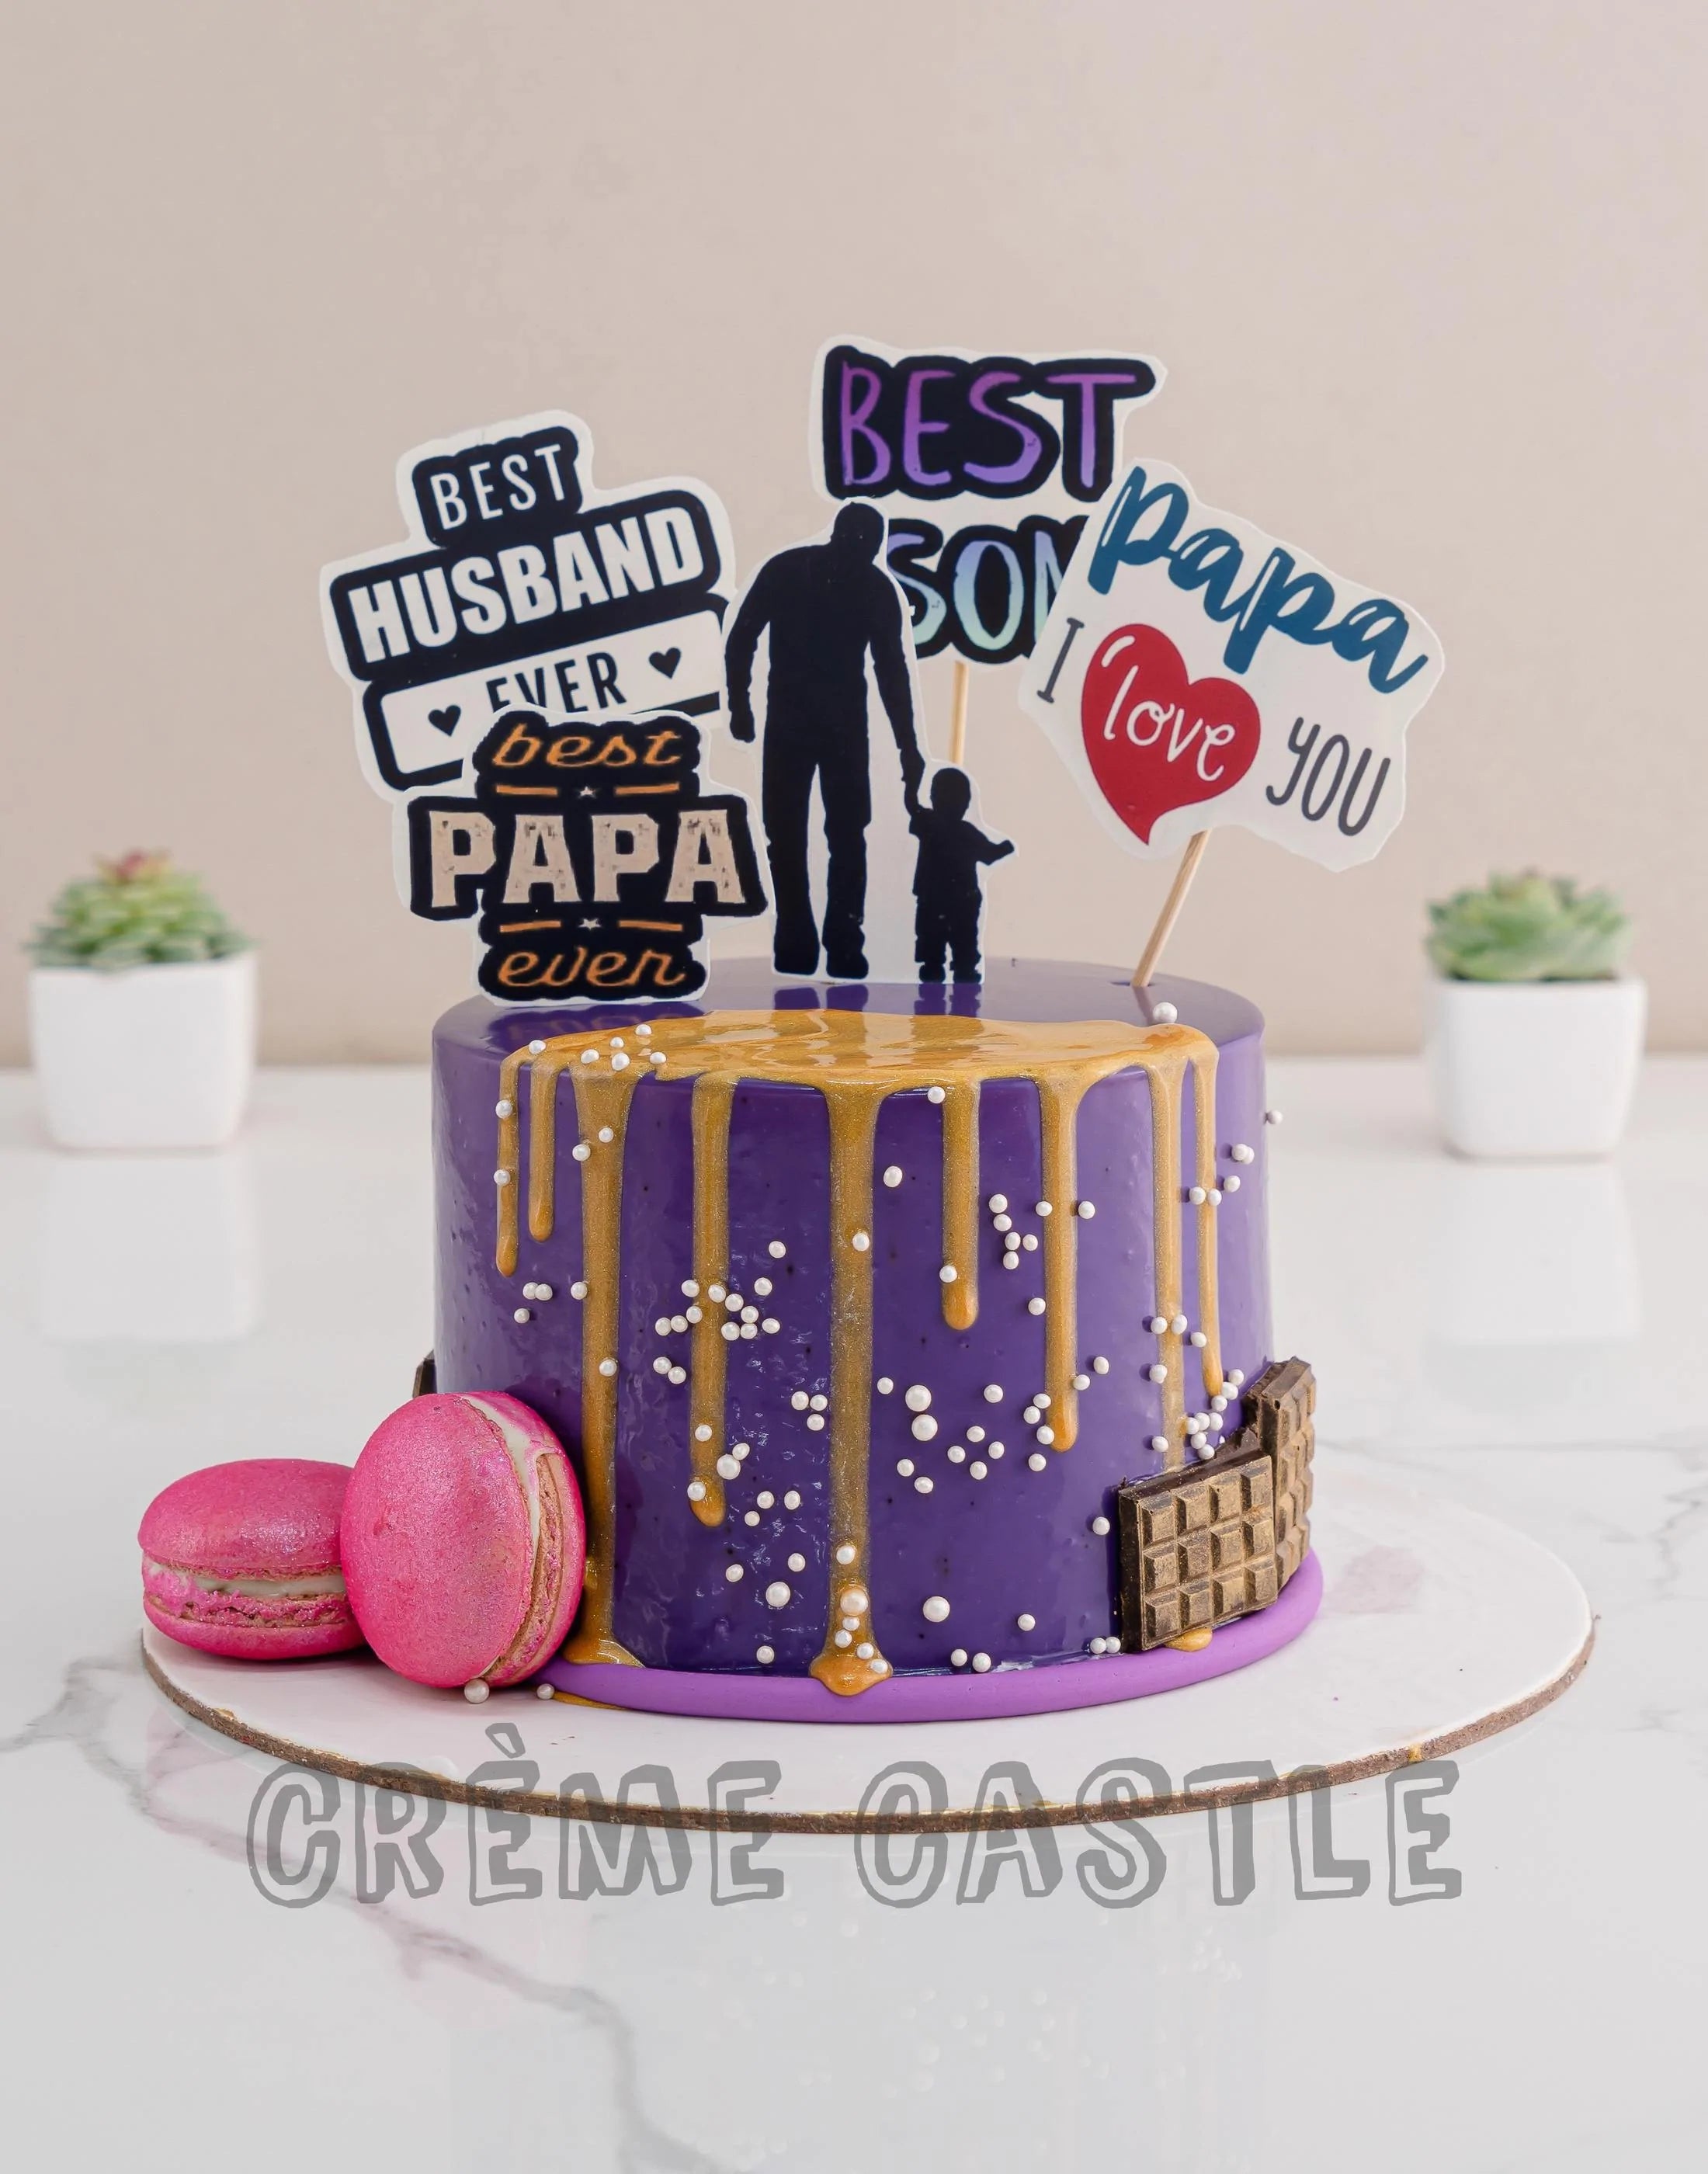 Father's and daughter's backs - edible cake topper